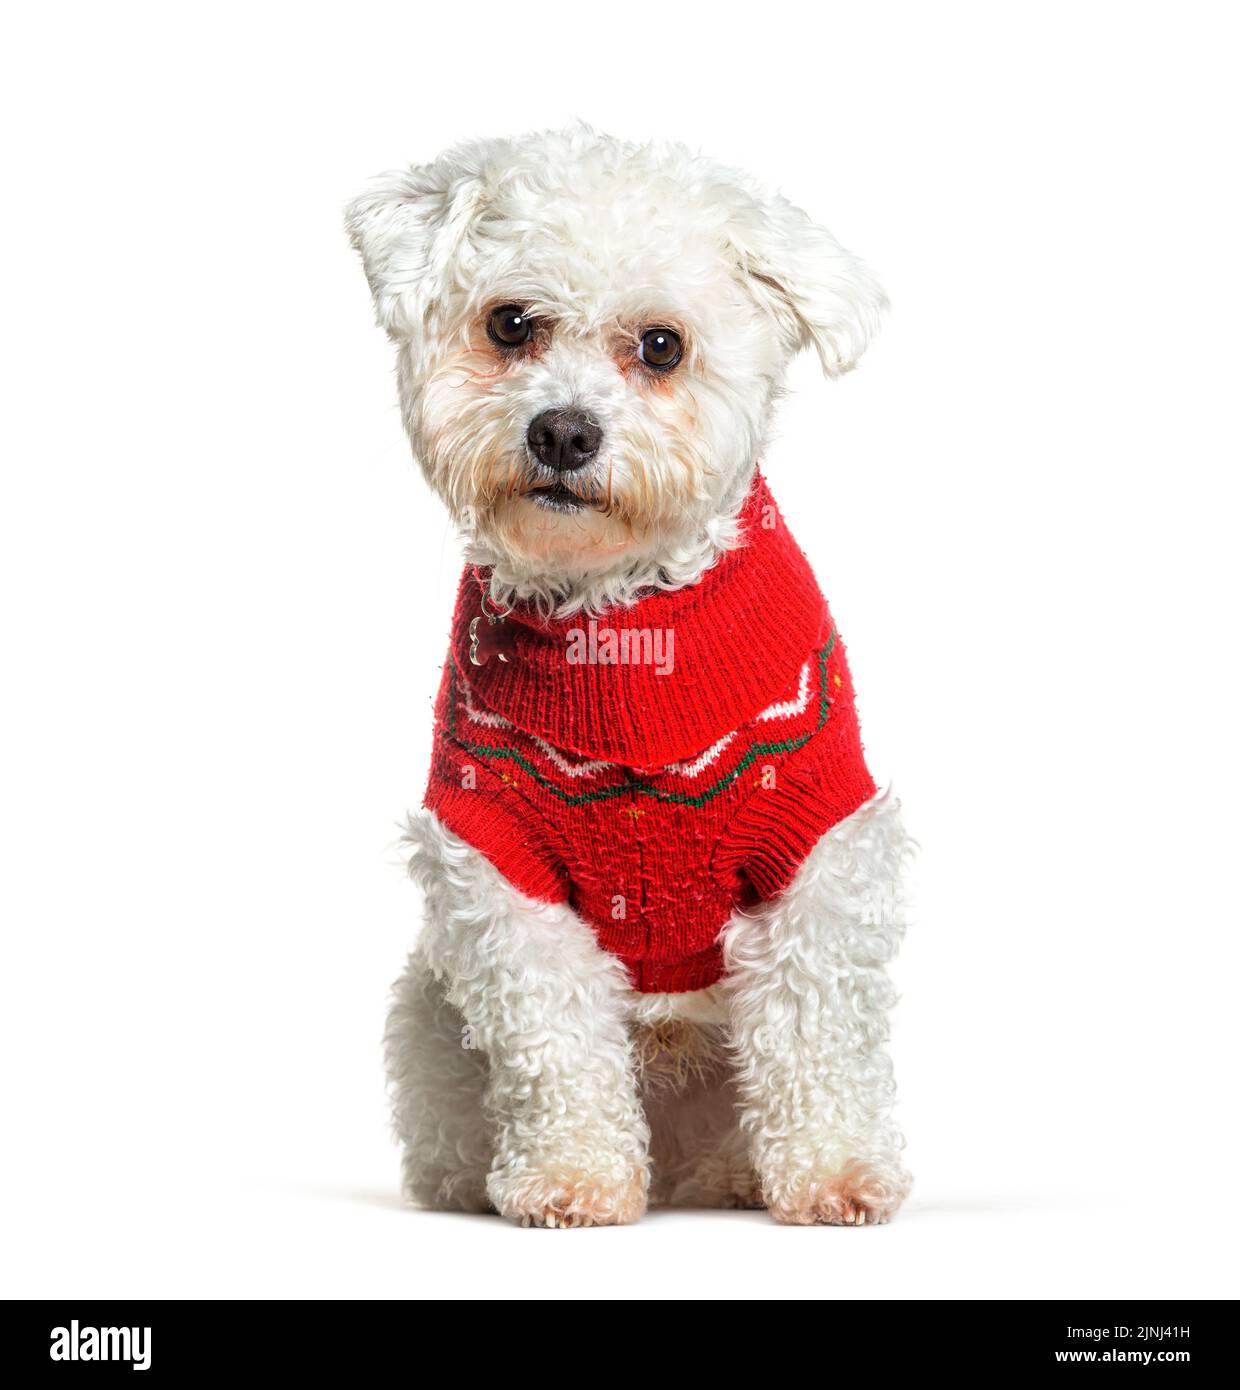 Bichon Frise sitting and looking at the camera wearing a red woollen coat, isolated on white Stock Photo